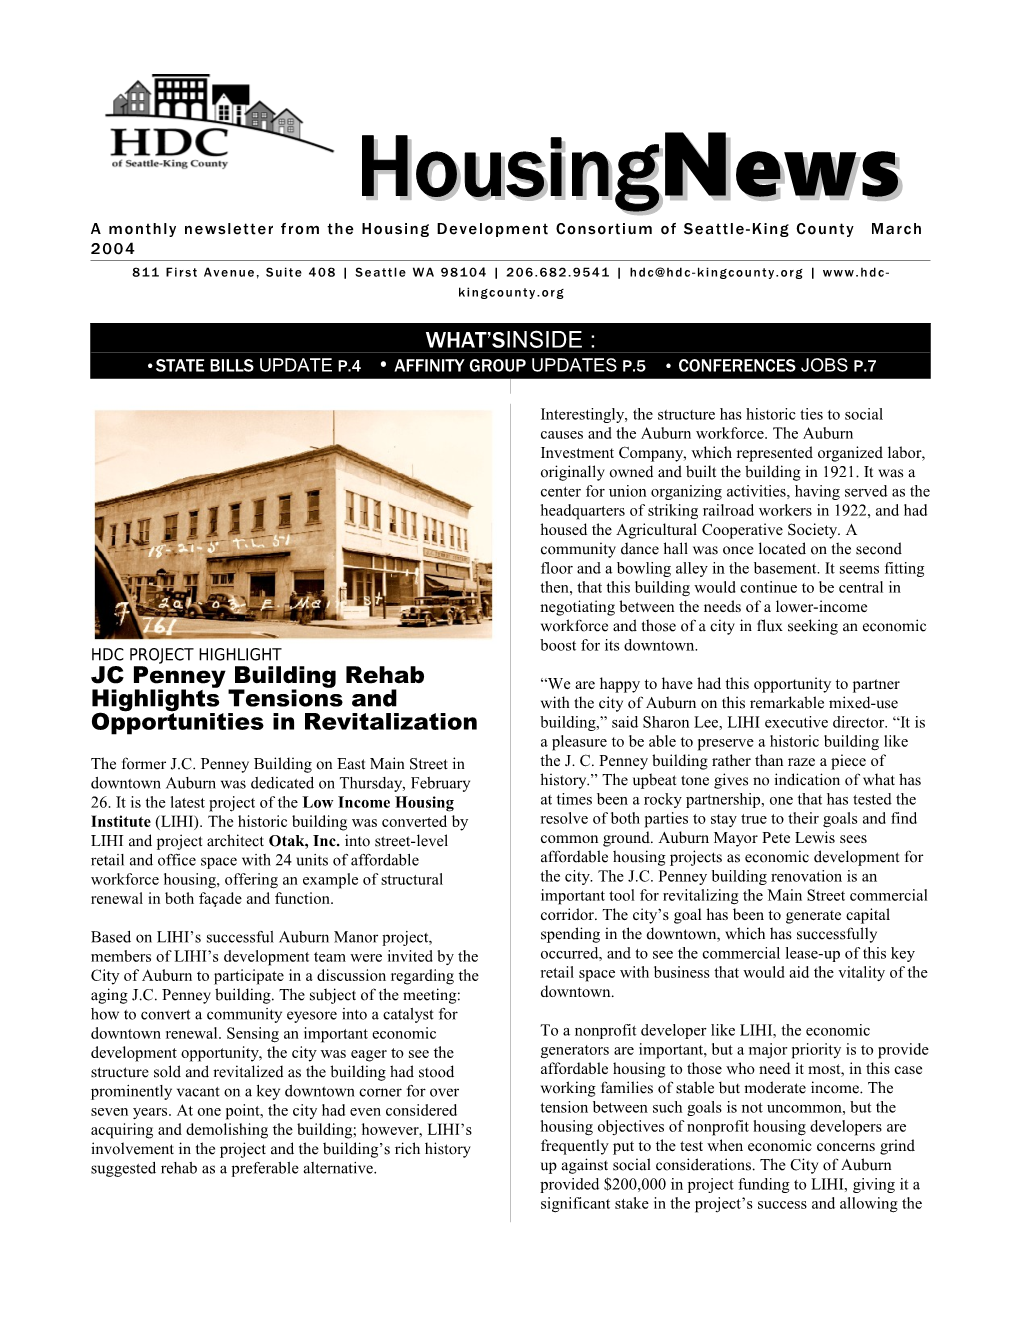 A Monthly Newsletter from the Housing Development Consortium of Seattle-King Countymarch 2004